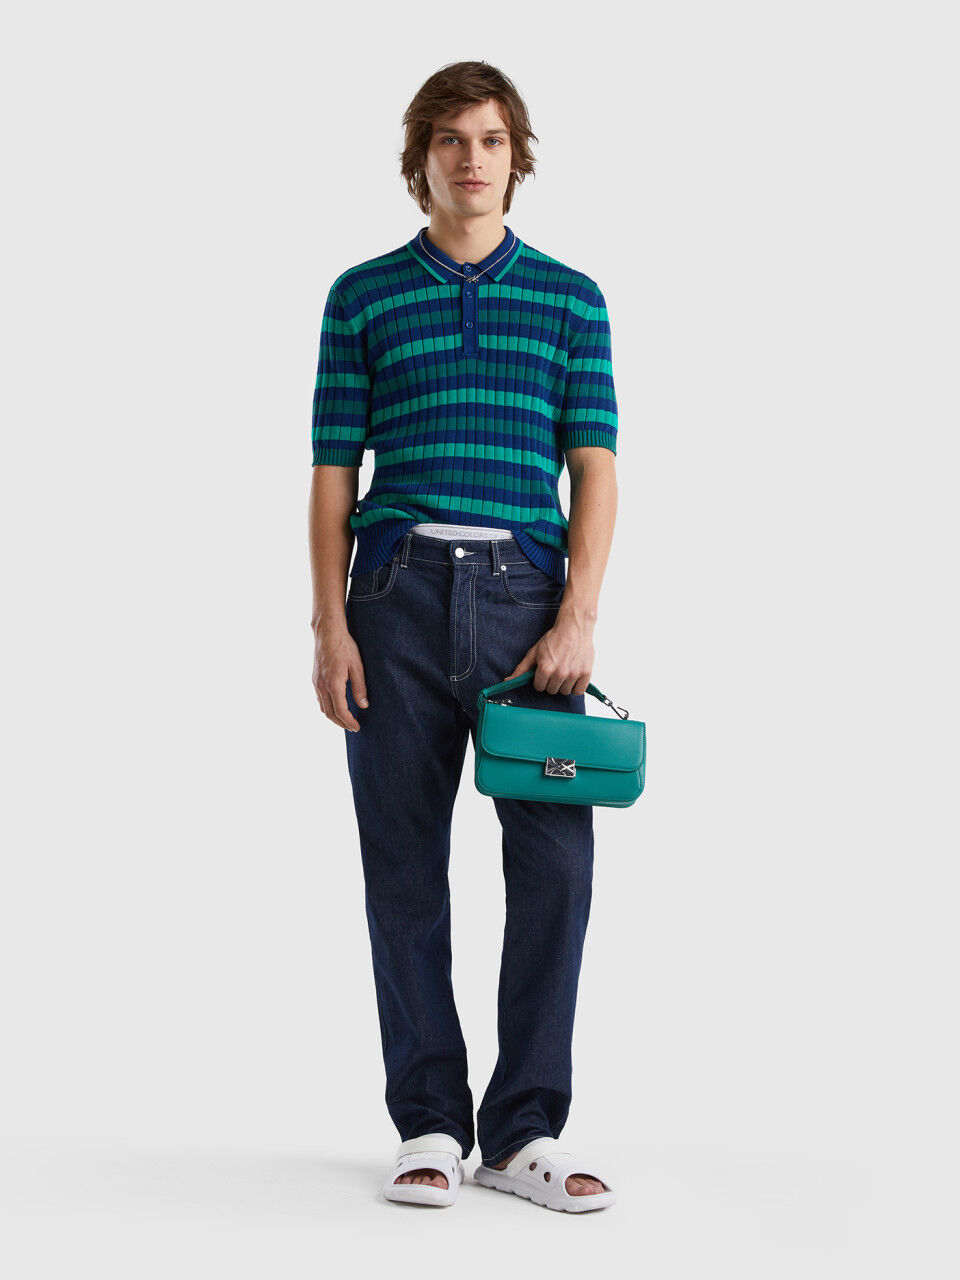 Green and blue striped knit polo